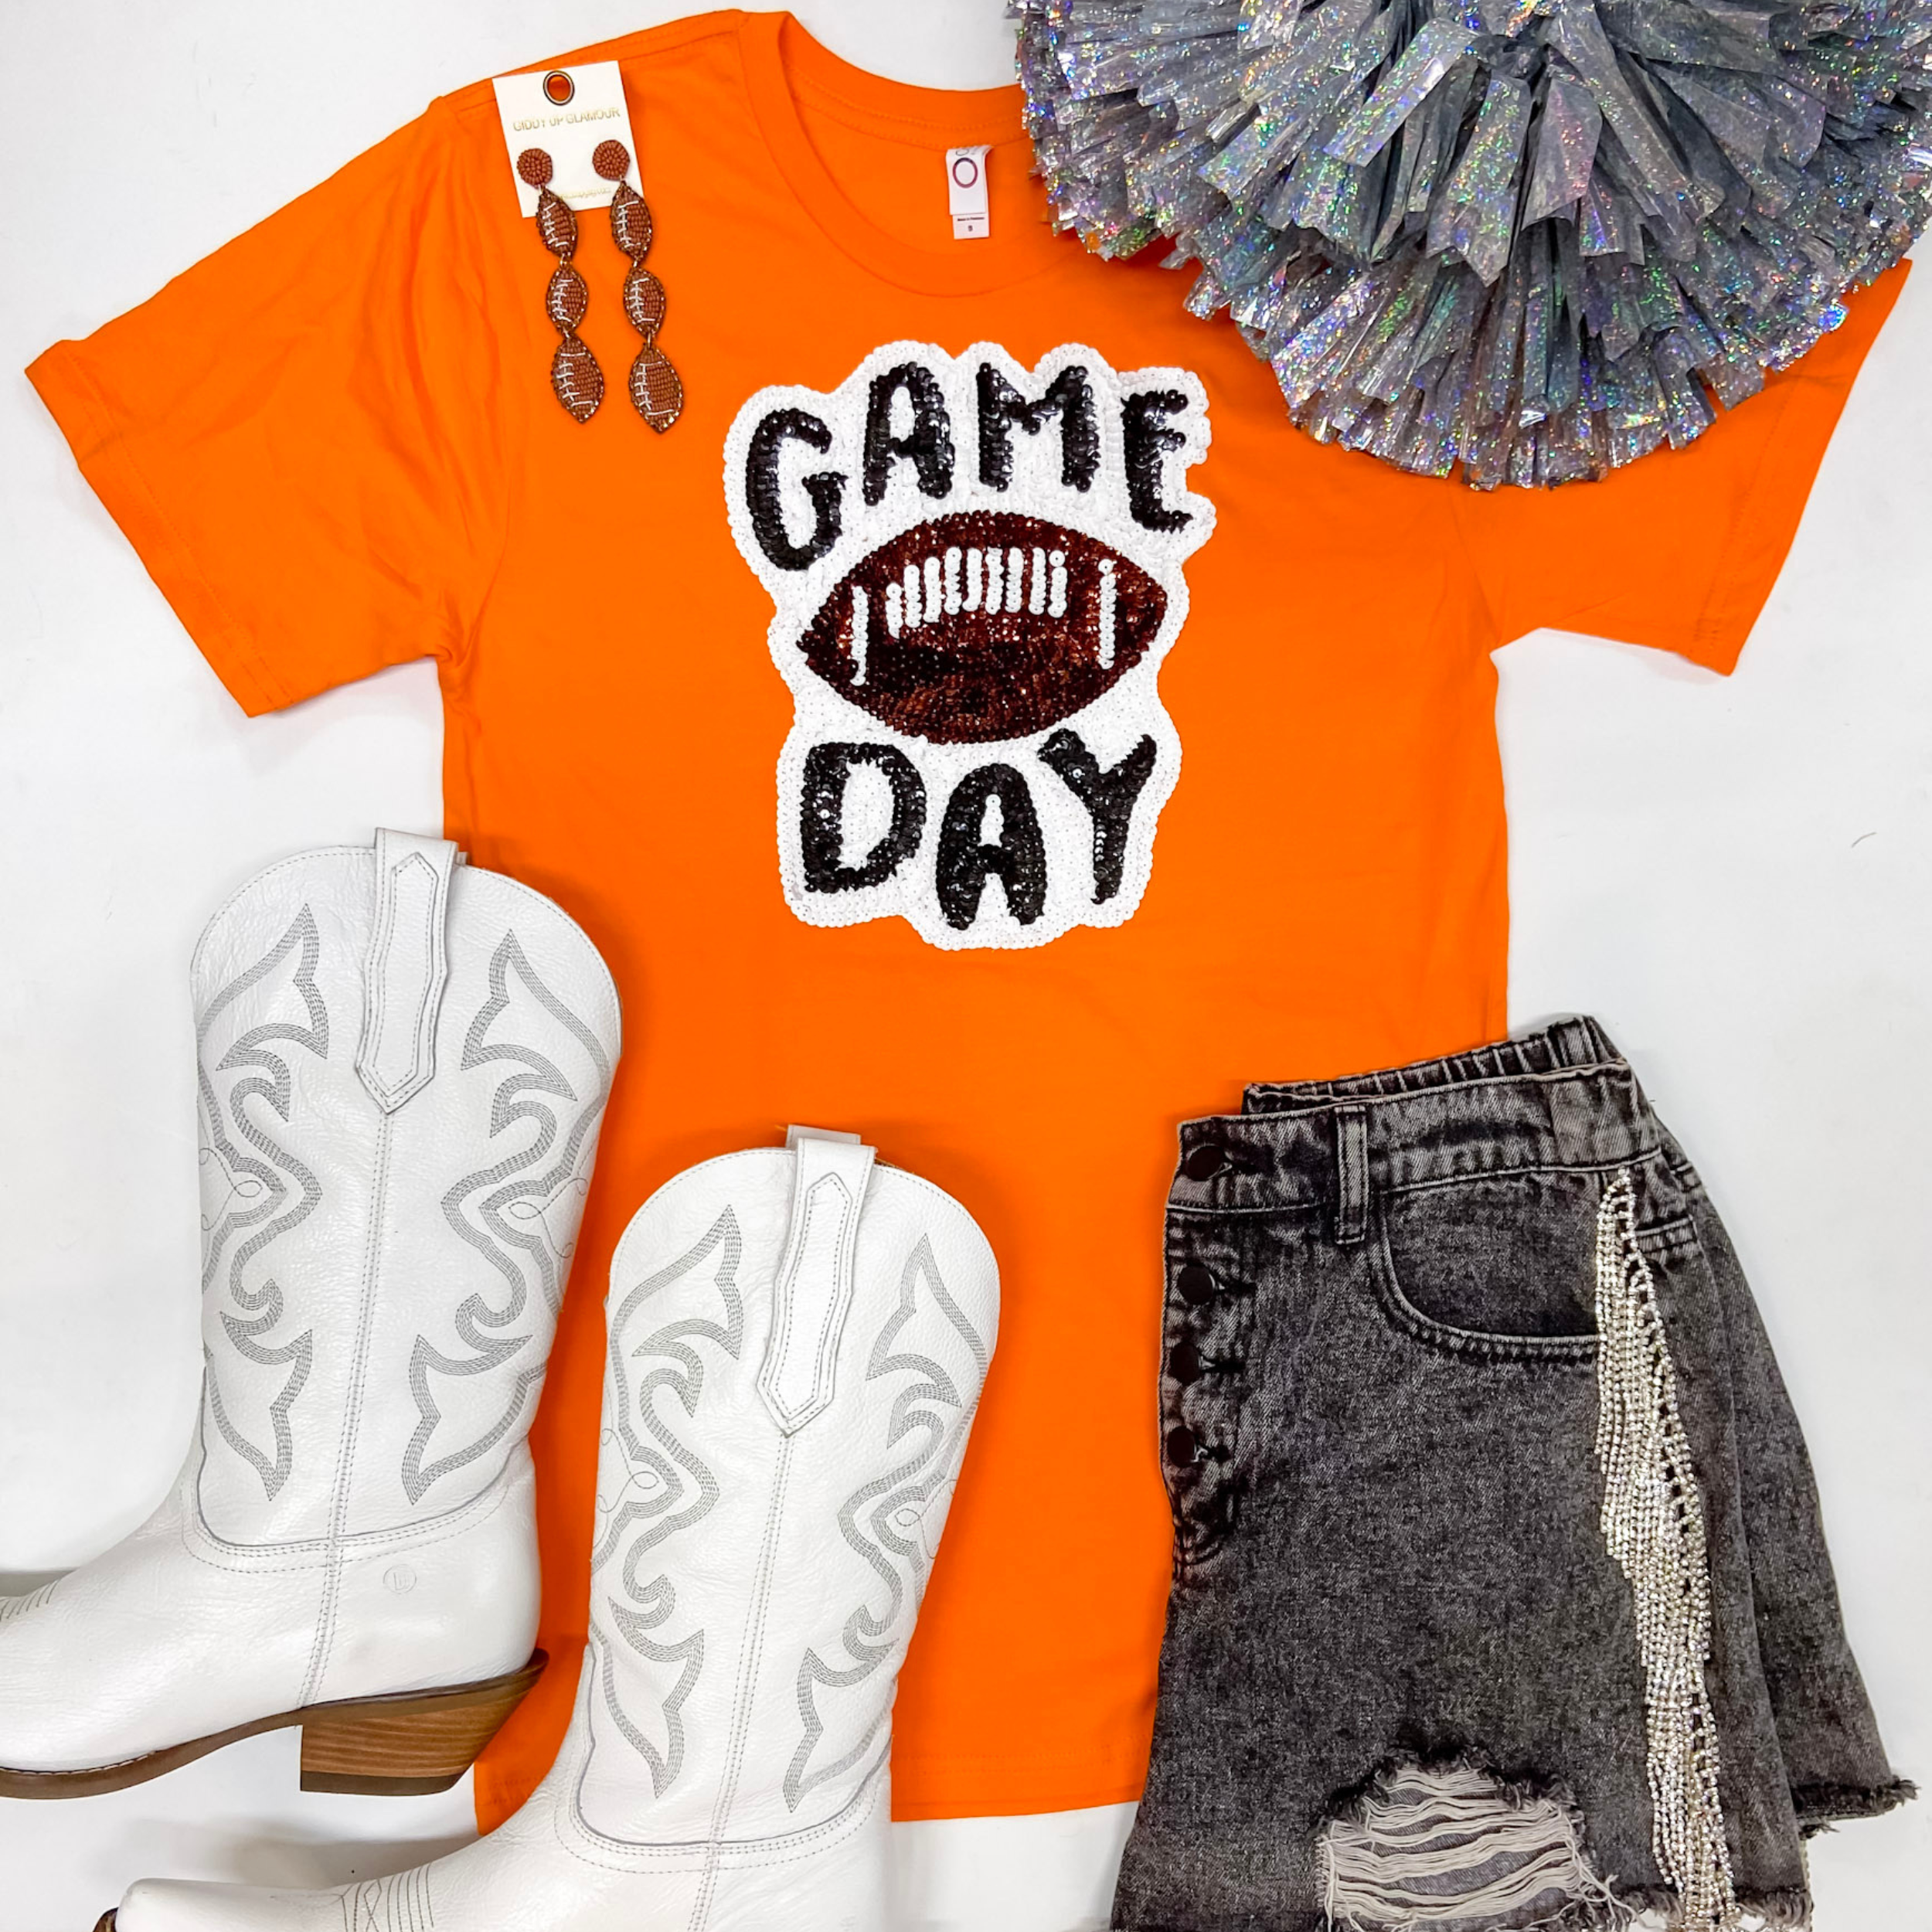 An orange short sleeve tee shirt with a gameday sequin patch on the front. It is laid on a white background with white boots, black shorts, and football earrings.